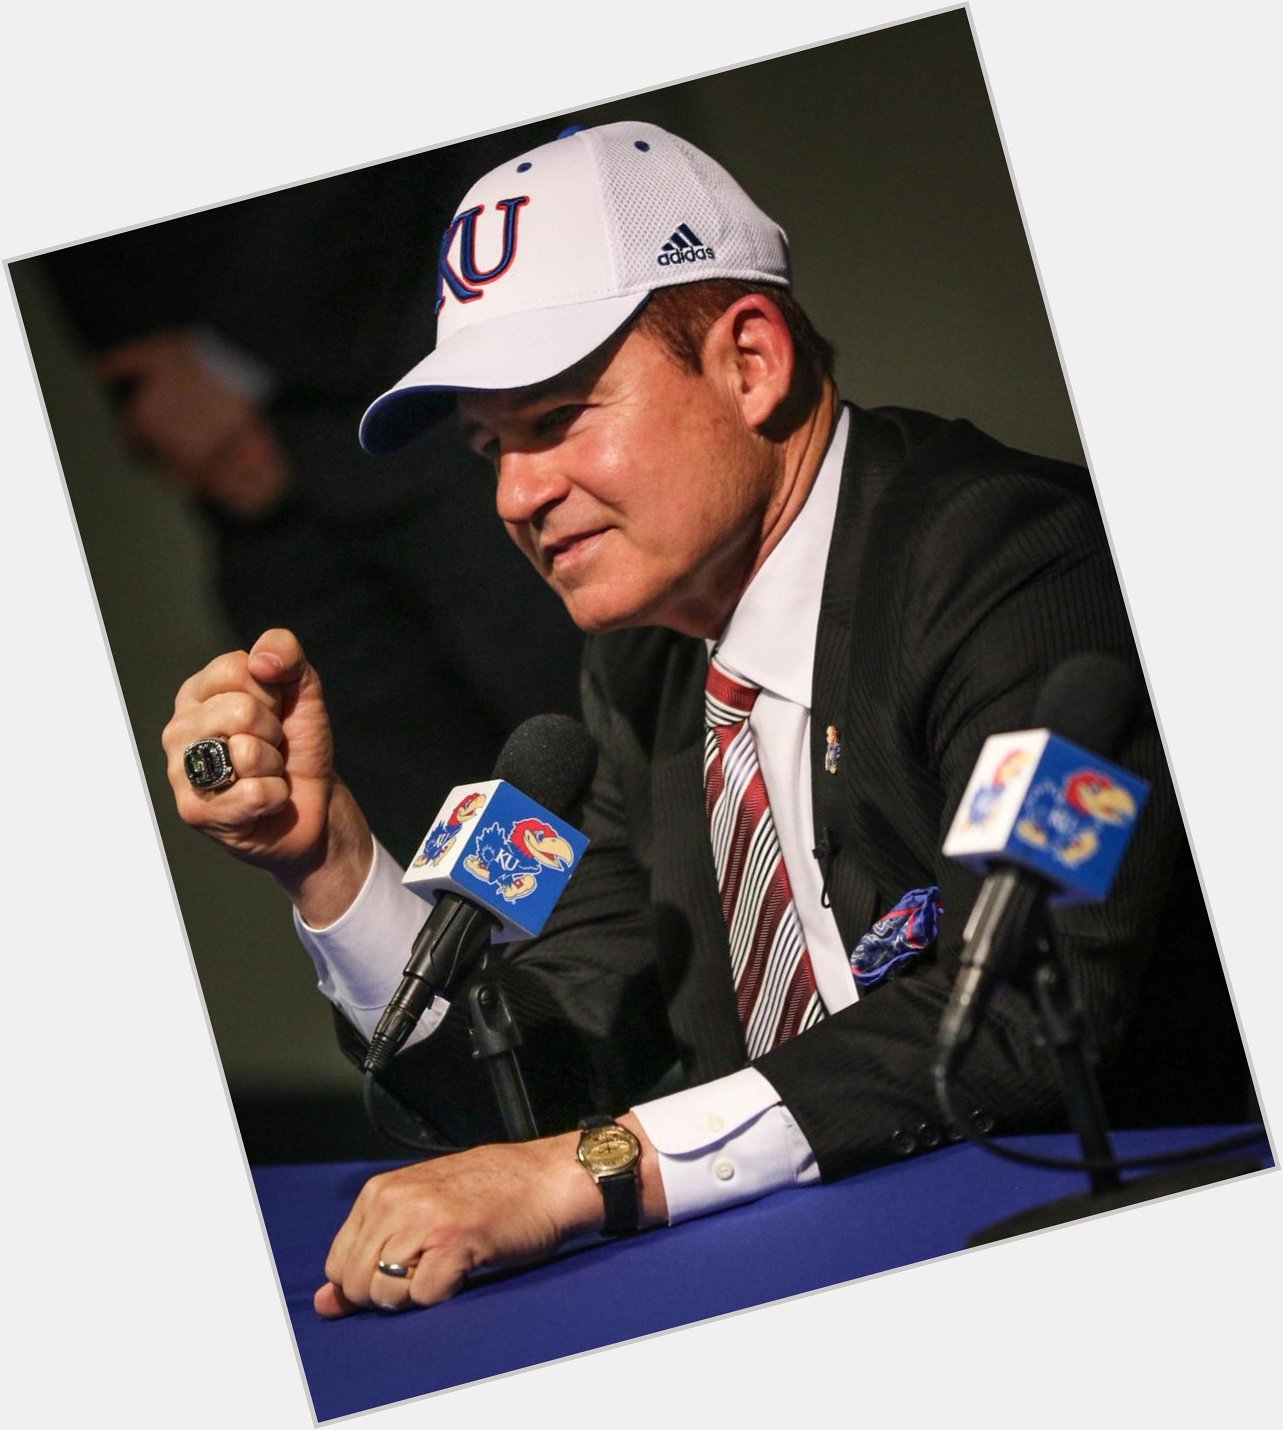 Happy birthday to The Mad Hatter, Les Miles. 